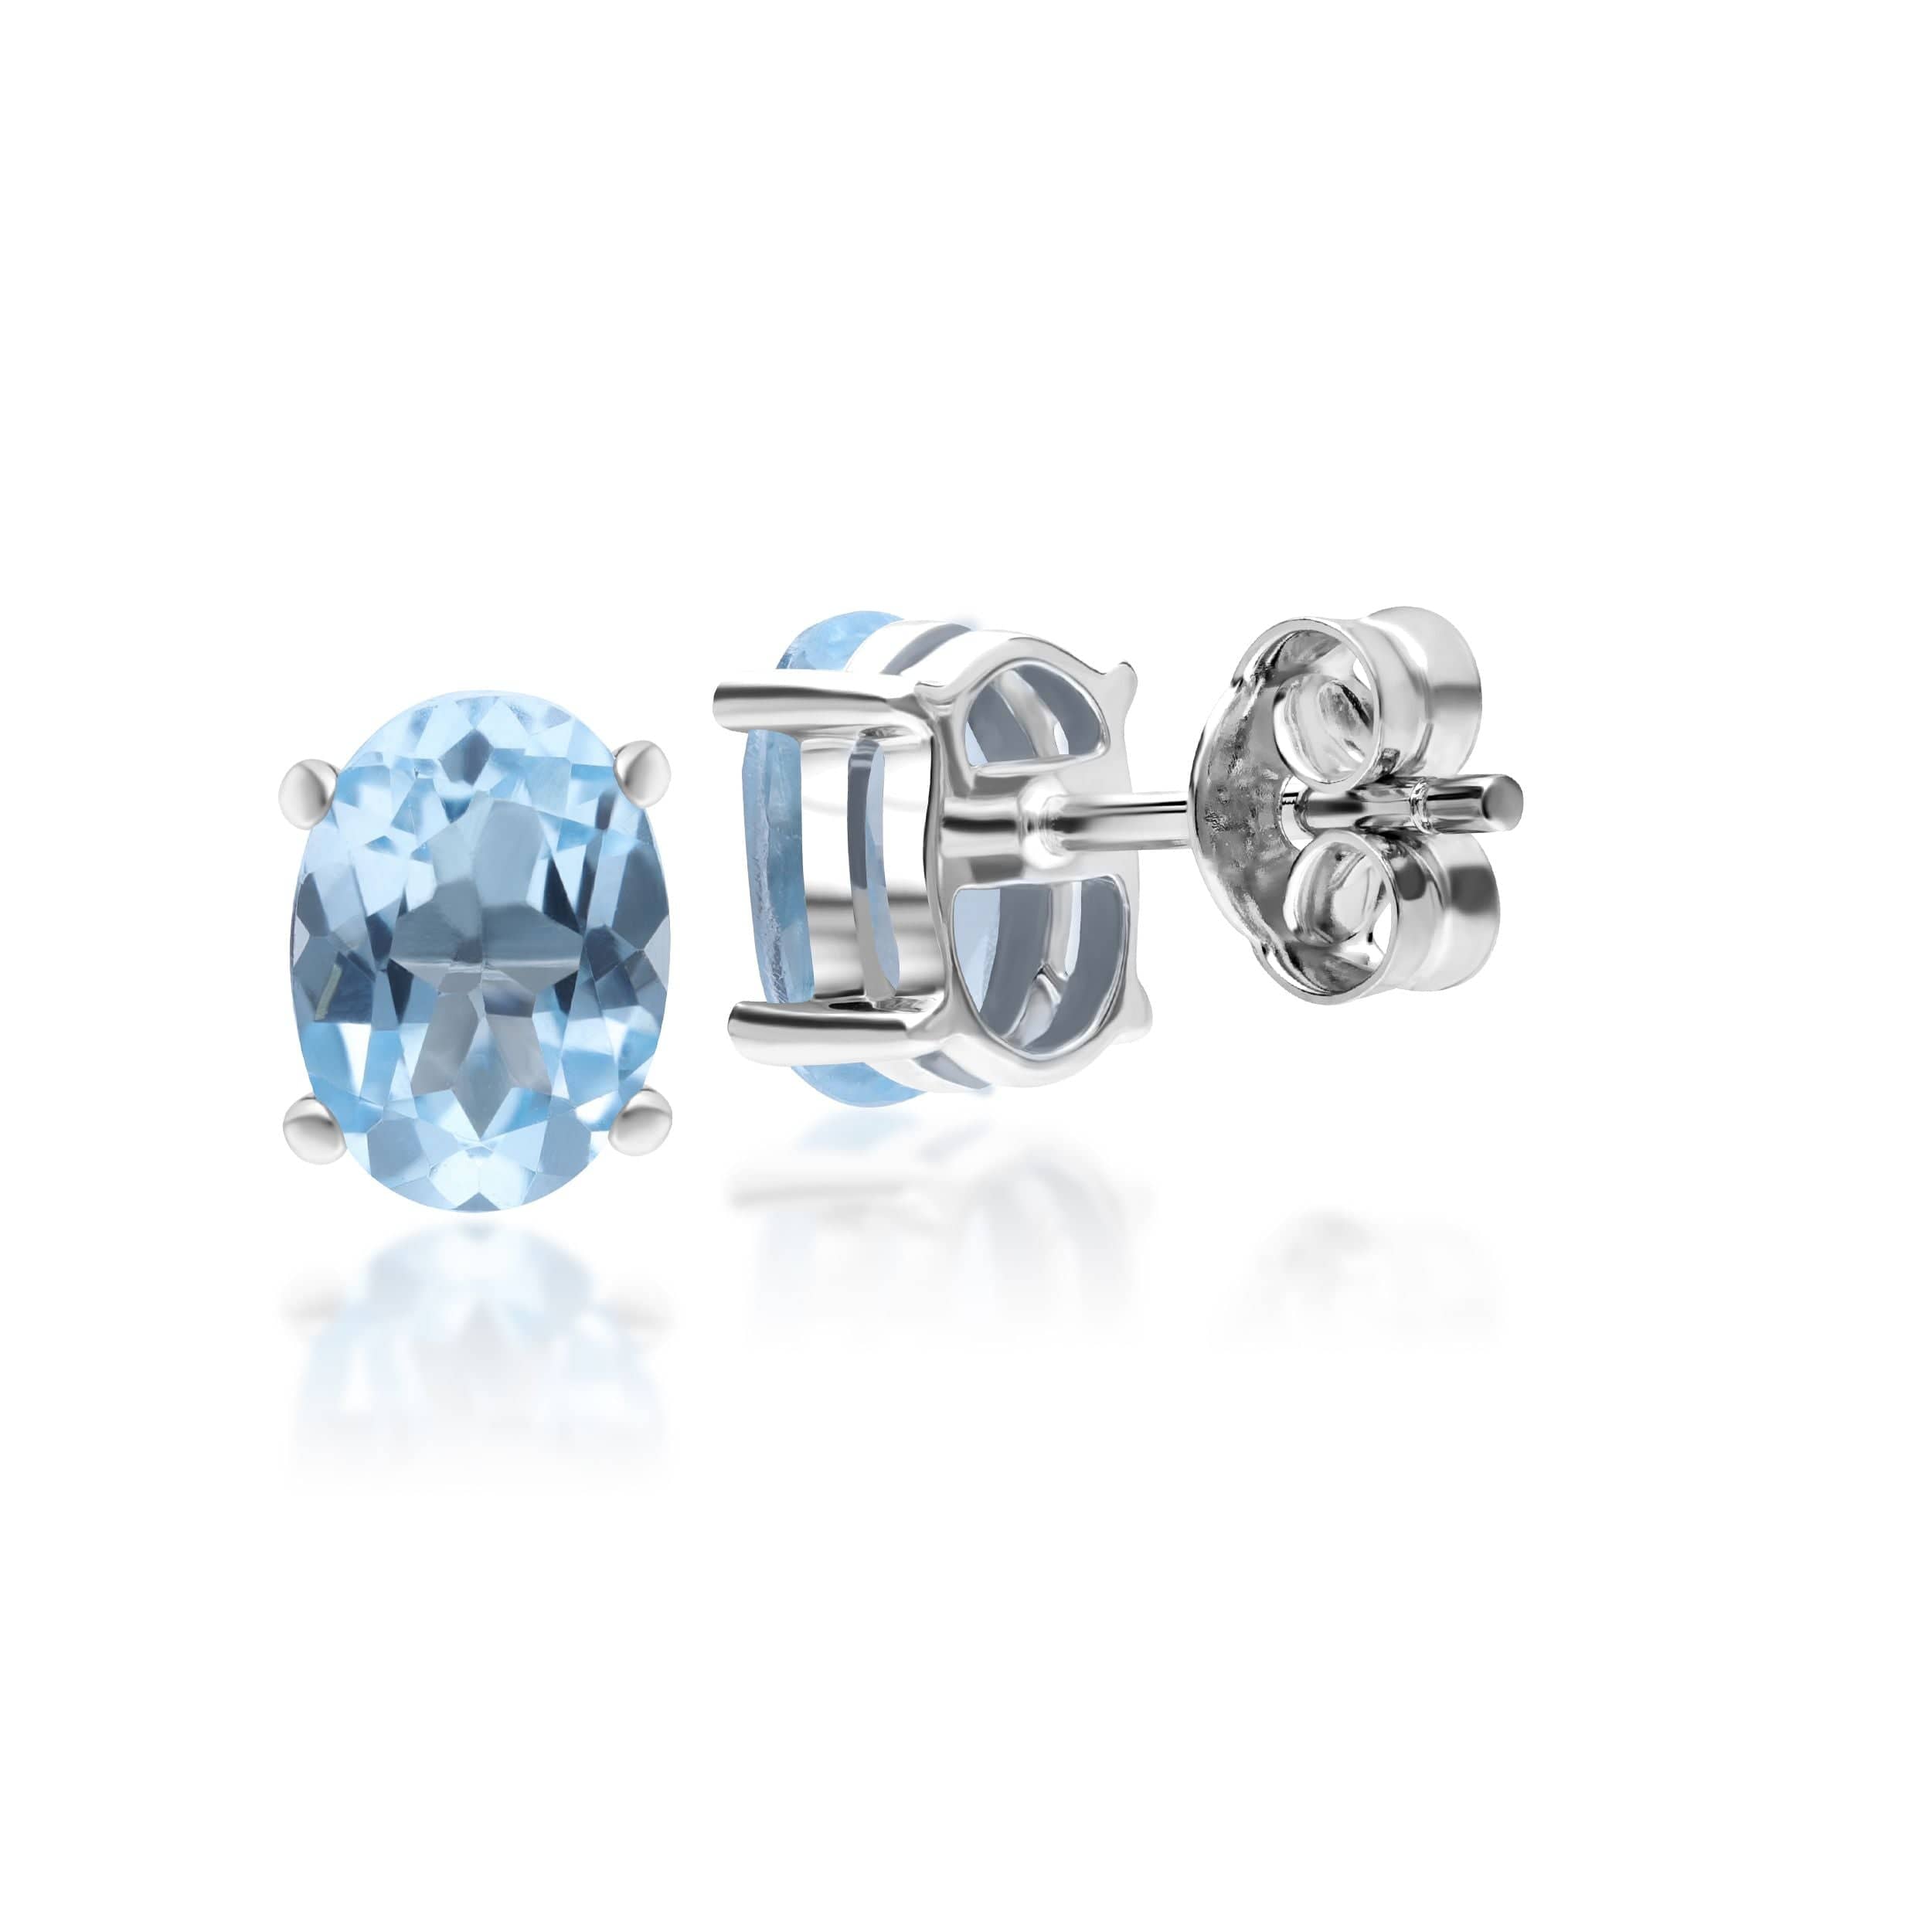 10256 Classic Oval Blue Topaz Stud Earrings in 9ct White Gold 3